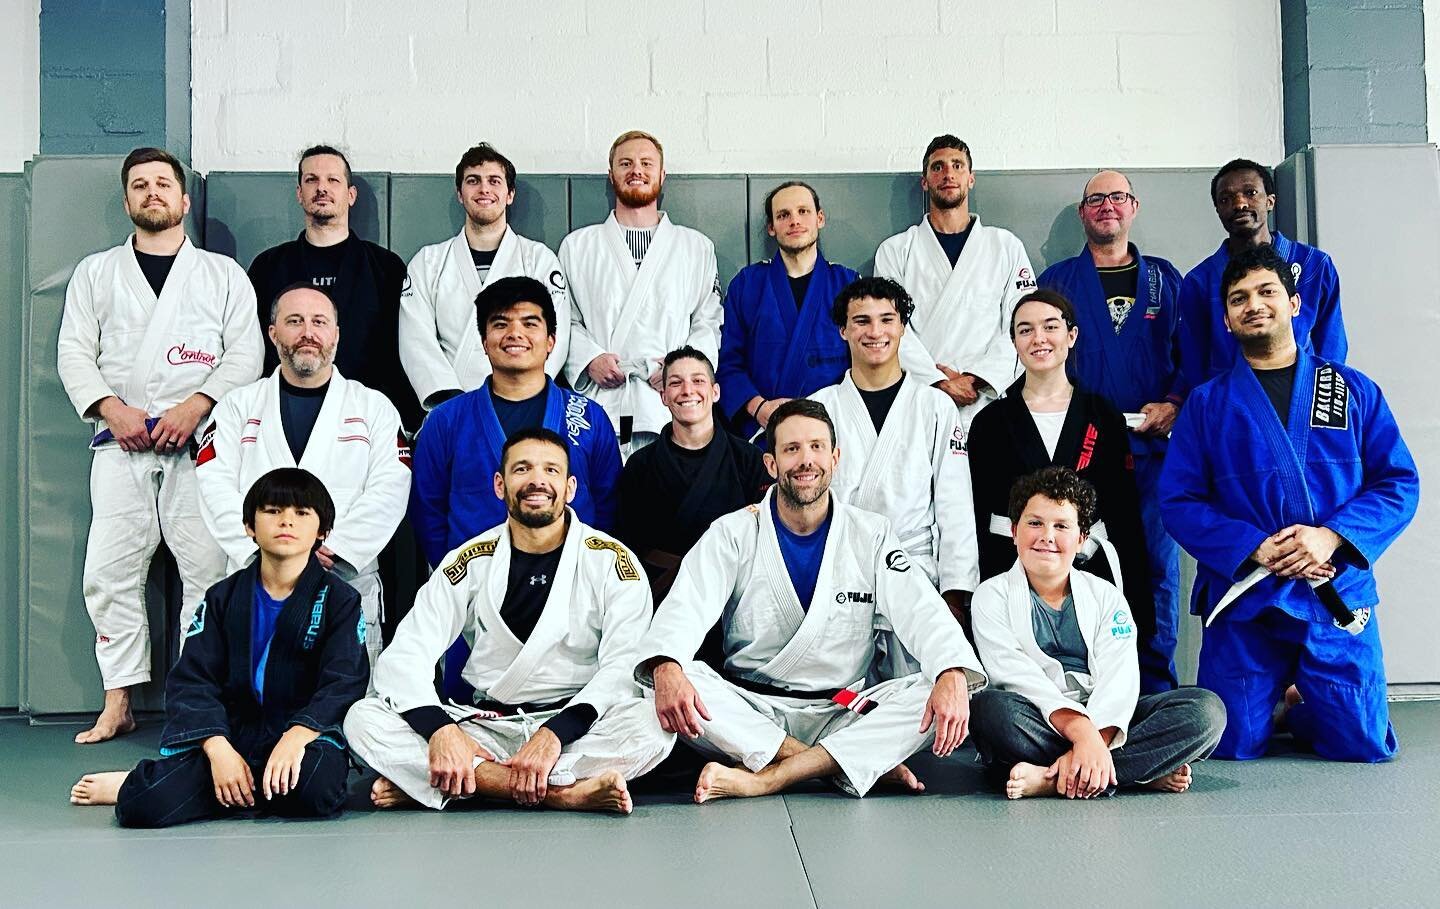 The @zoobjjsea crew at the @jack_mcvicker seminar!!! Big thanks to Jack for taking the time to drop some great knowledge!! Also, huge congrats to @lum_chris on his promotion to Black Belt!!! #zoobjjsea #mcvickerbjj #burienbjj #combatartsacademy